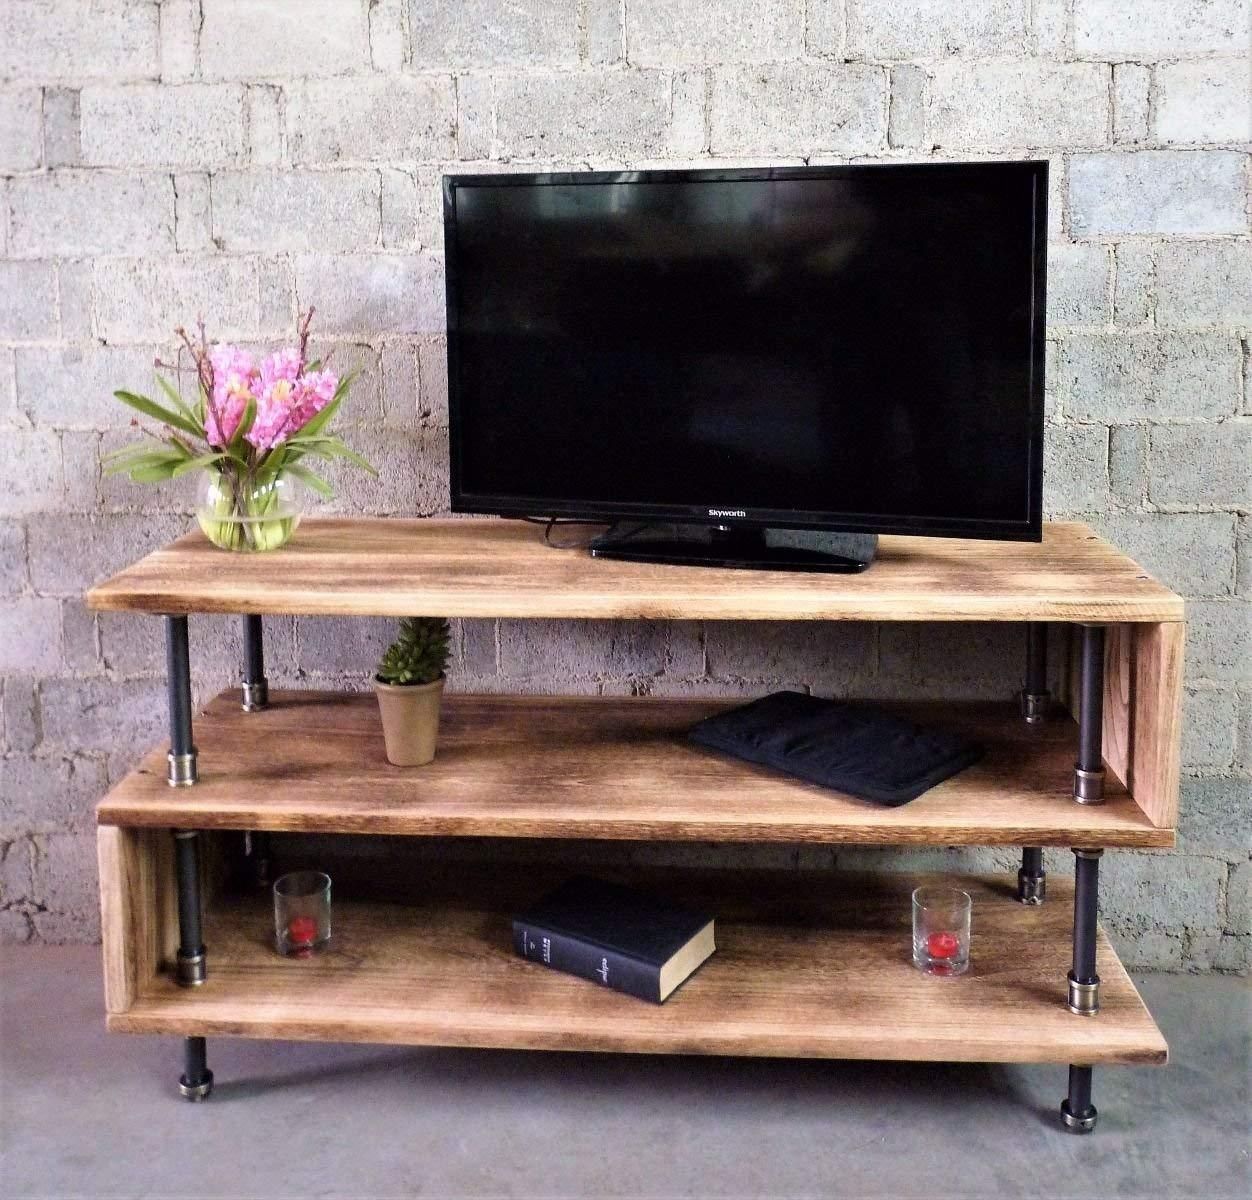 Tucson Modern Industrial Tv Stand – Onlinegnrlstore | Tv Within Modern Wood Tv Stands (View 8 of 15)